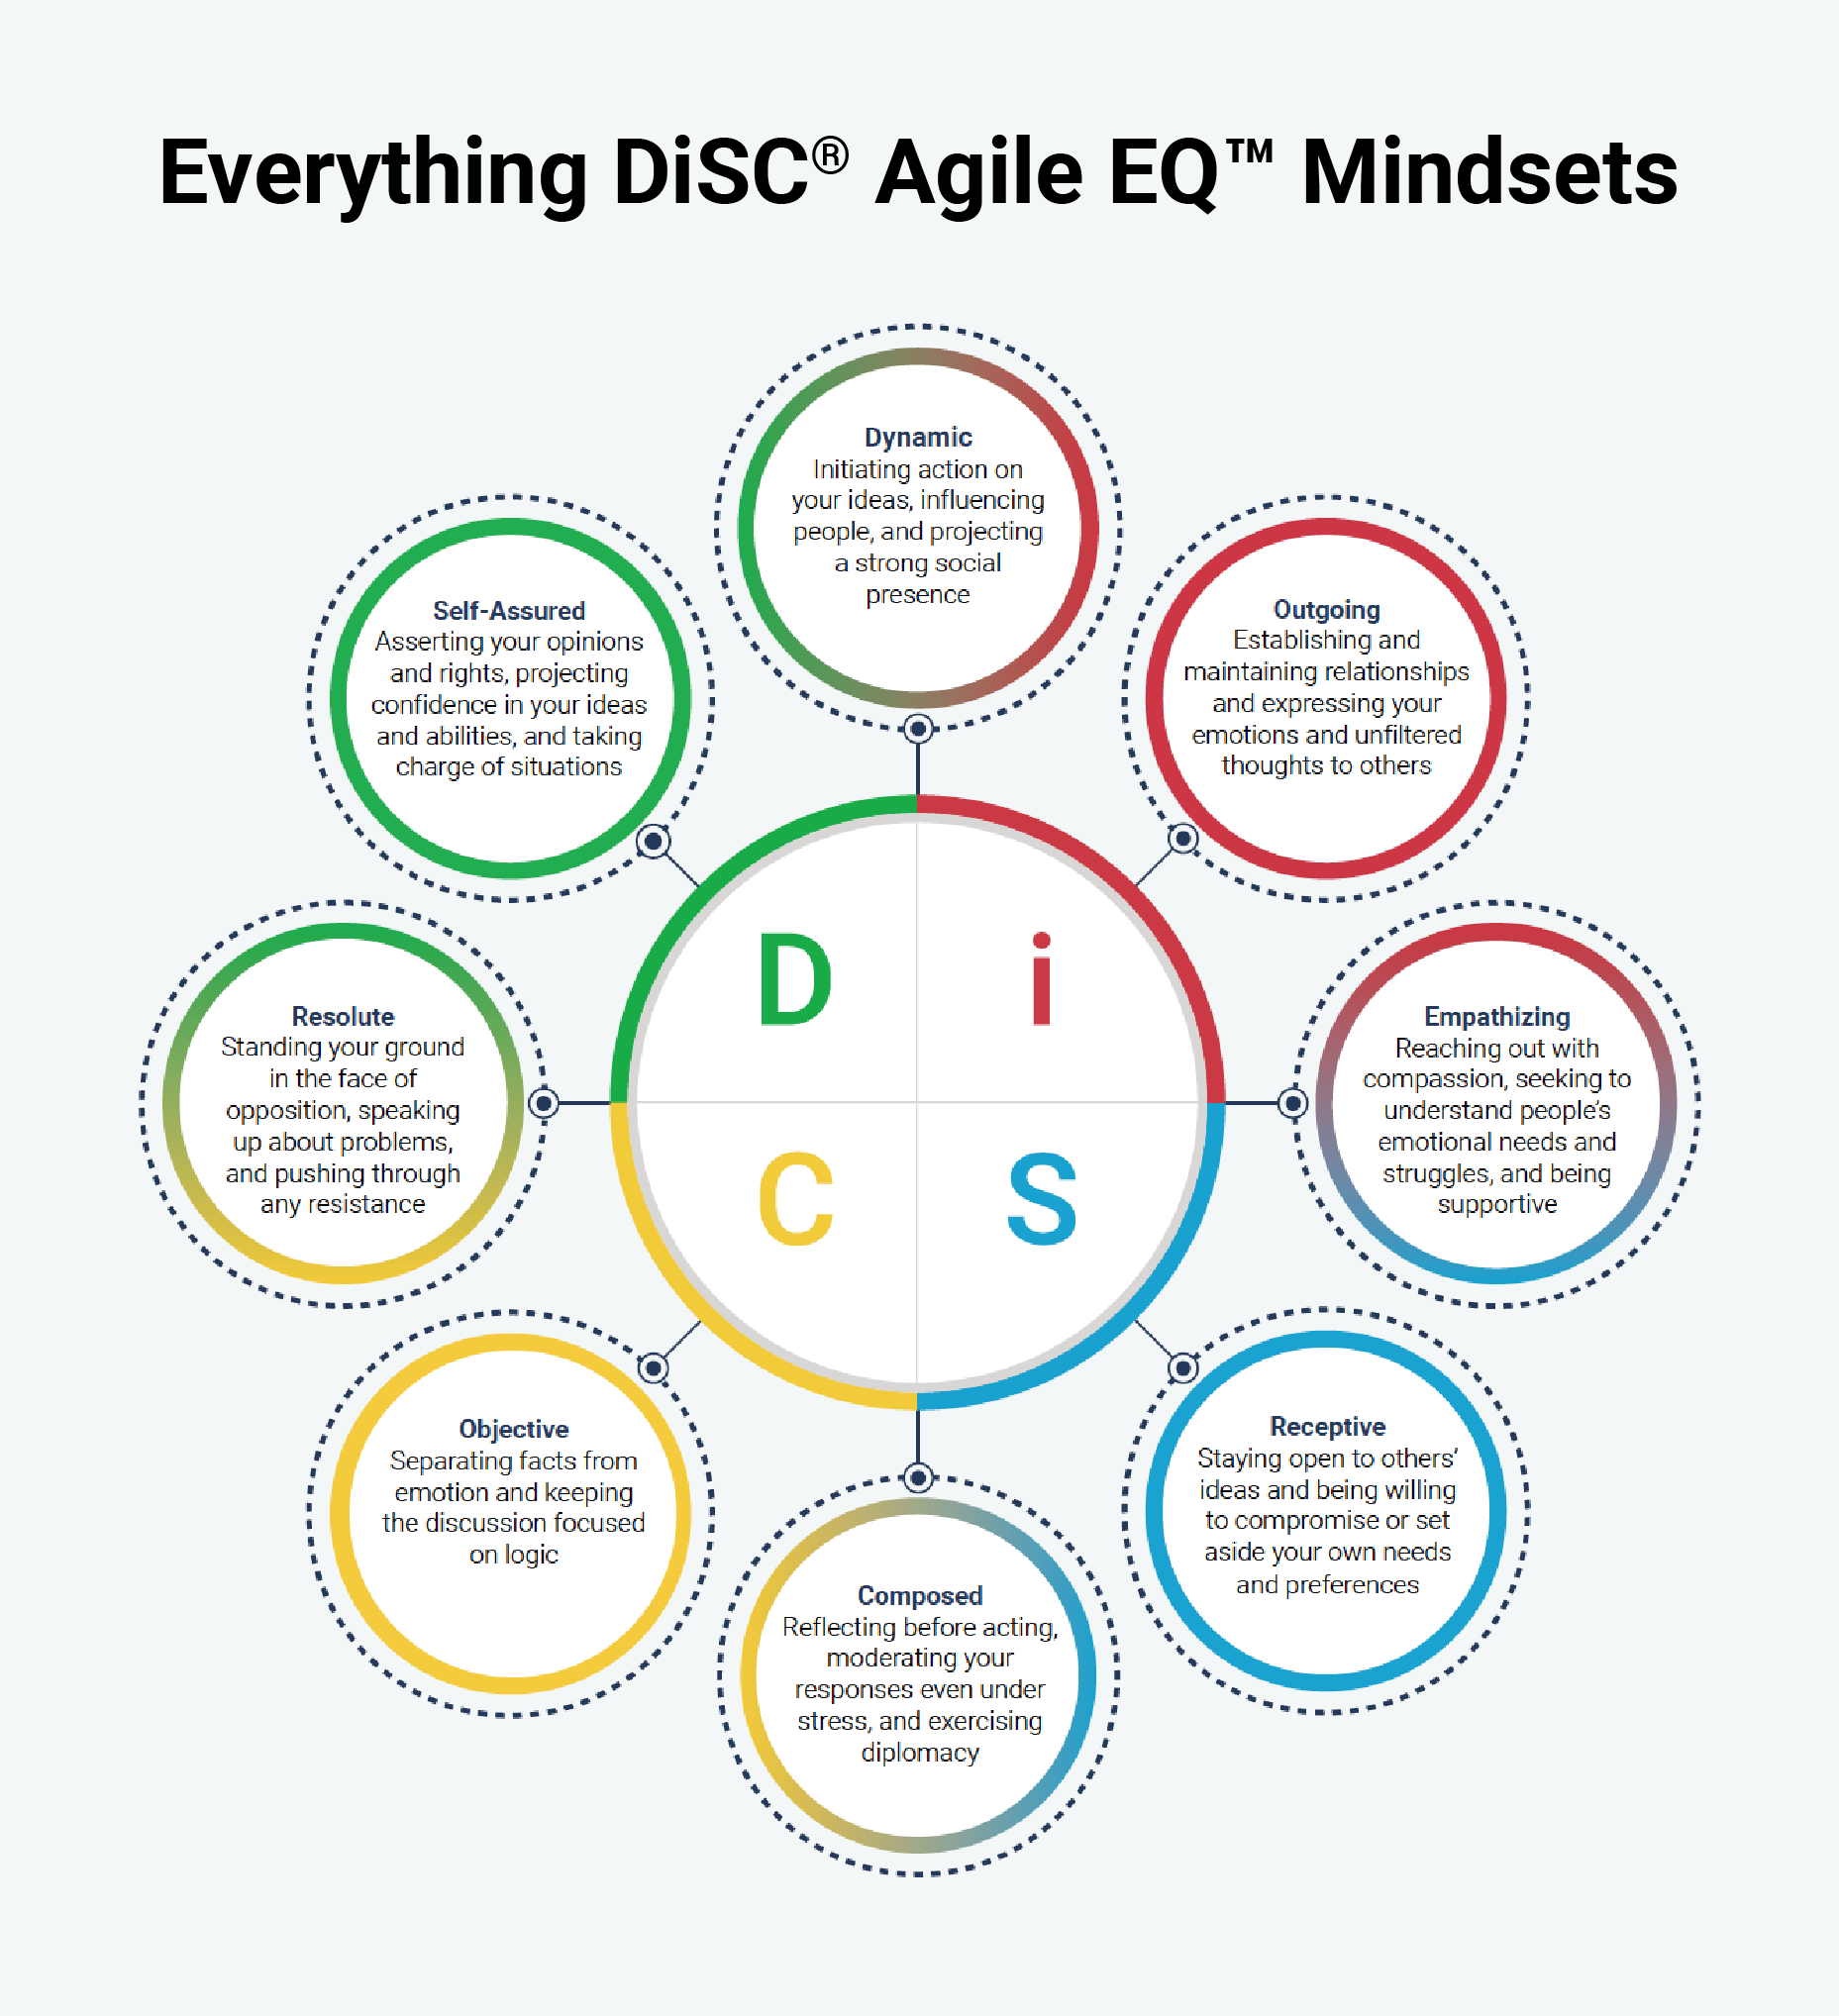 Everything DiSC<sup>®</sup> Agile EQ™ Mindsets graphic. Text on graphic is reproduced in body copy.